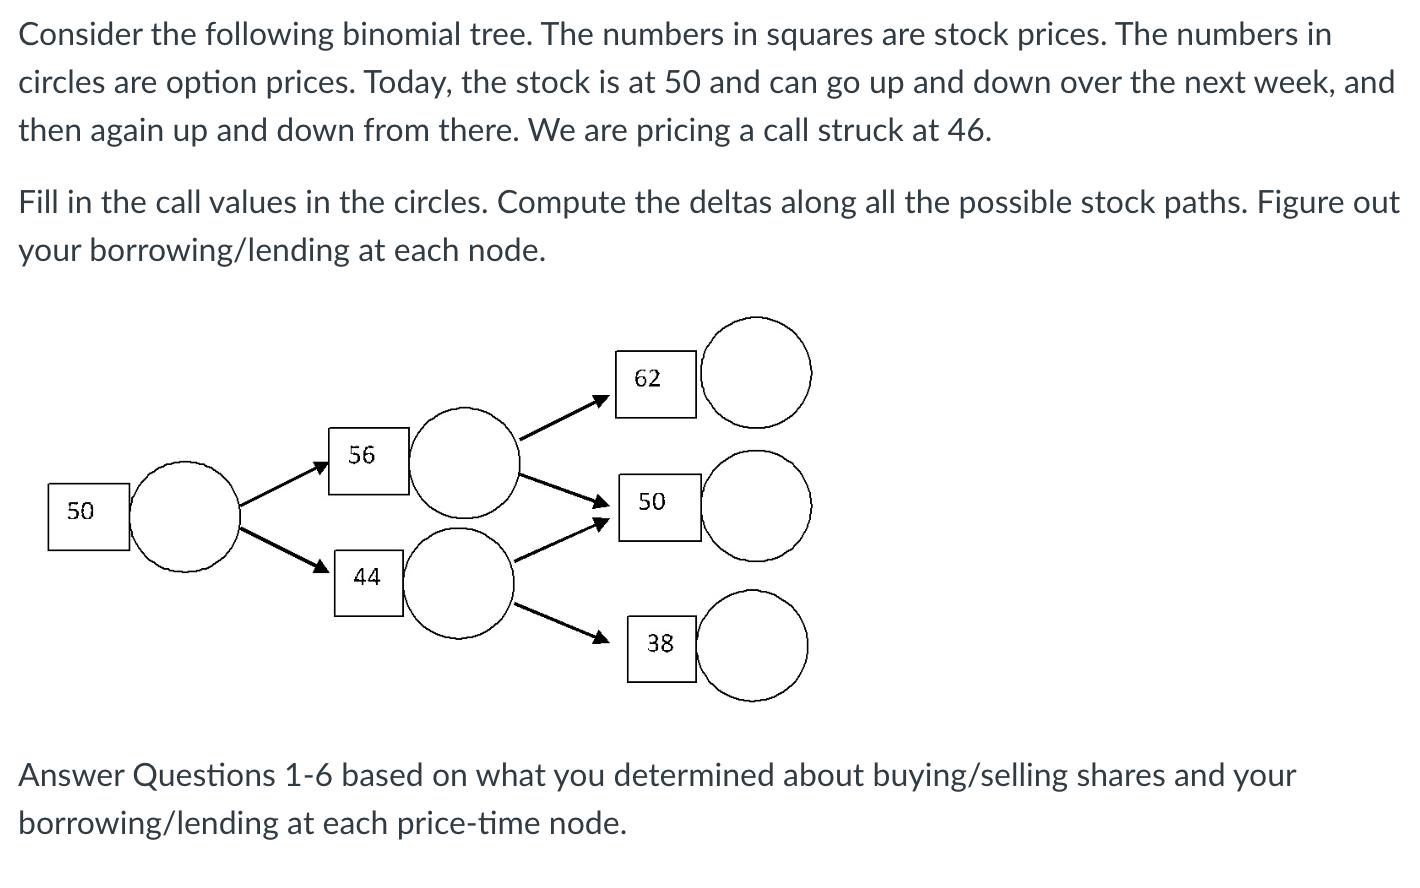 Consider the following binomial tree. The numbers in squares are stock prices. The numbers in circles are option prices. Toda